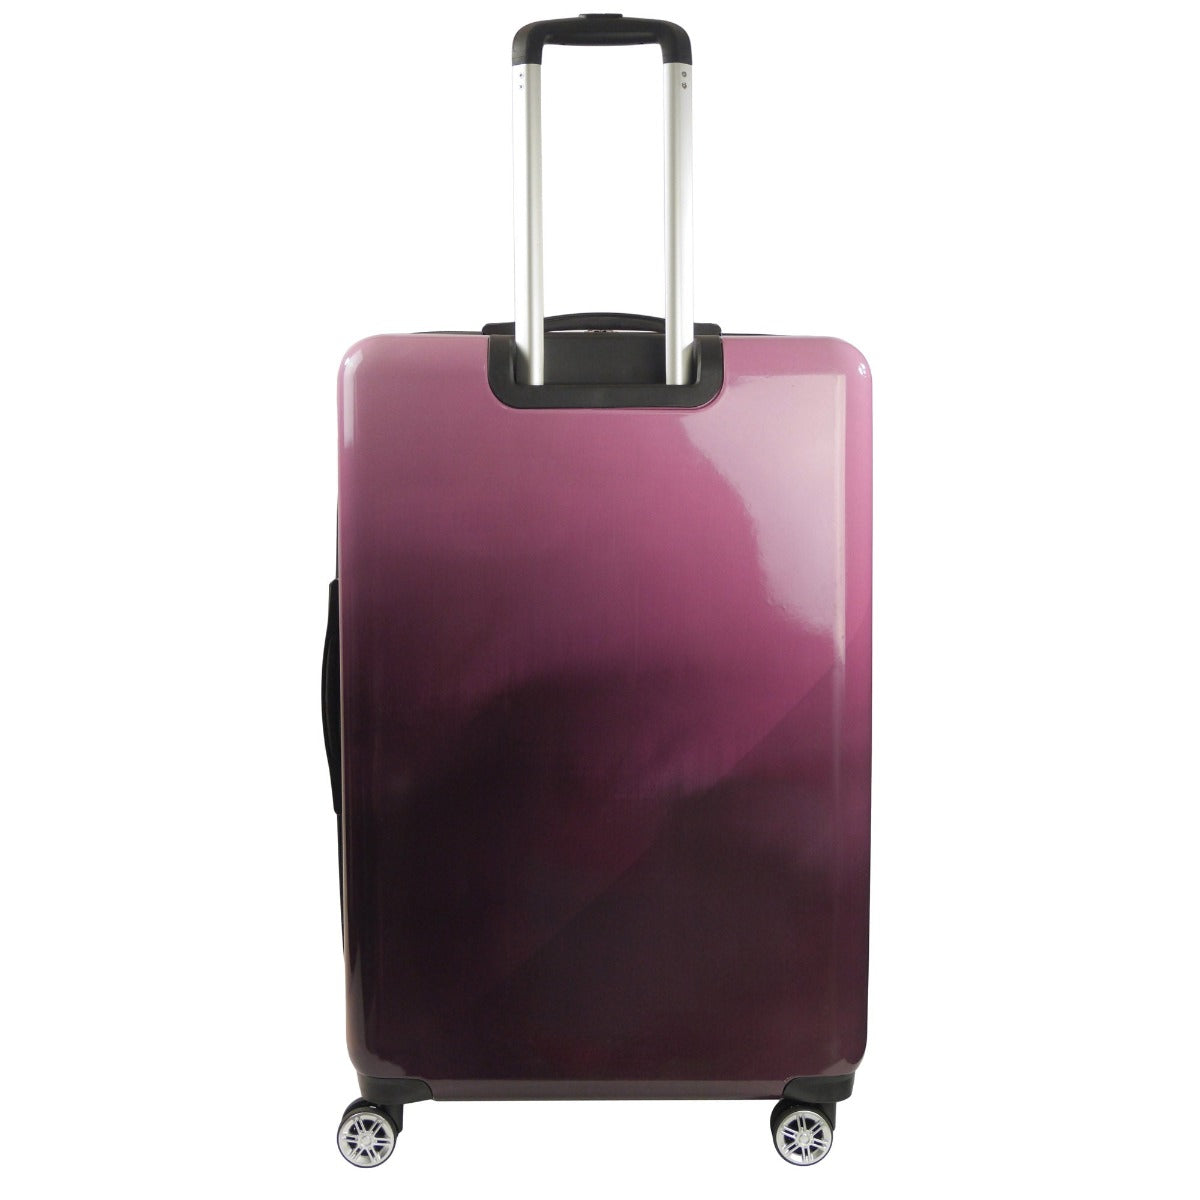 Ful Impulse Ombre Hardside Spinner Suitcase 31 inch Checked Luggage Pink Purple Fade 360° spinner wheels 2 inch expansion